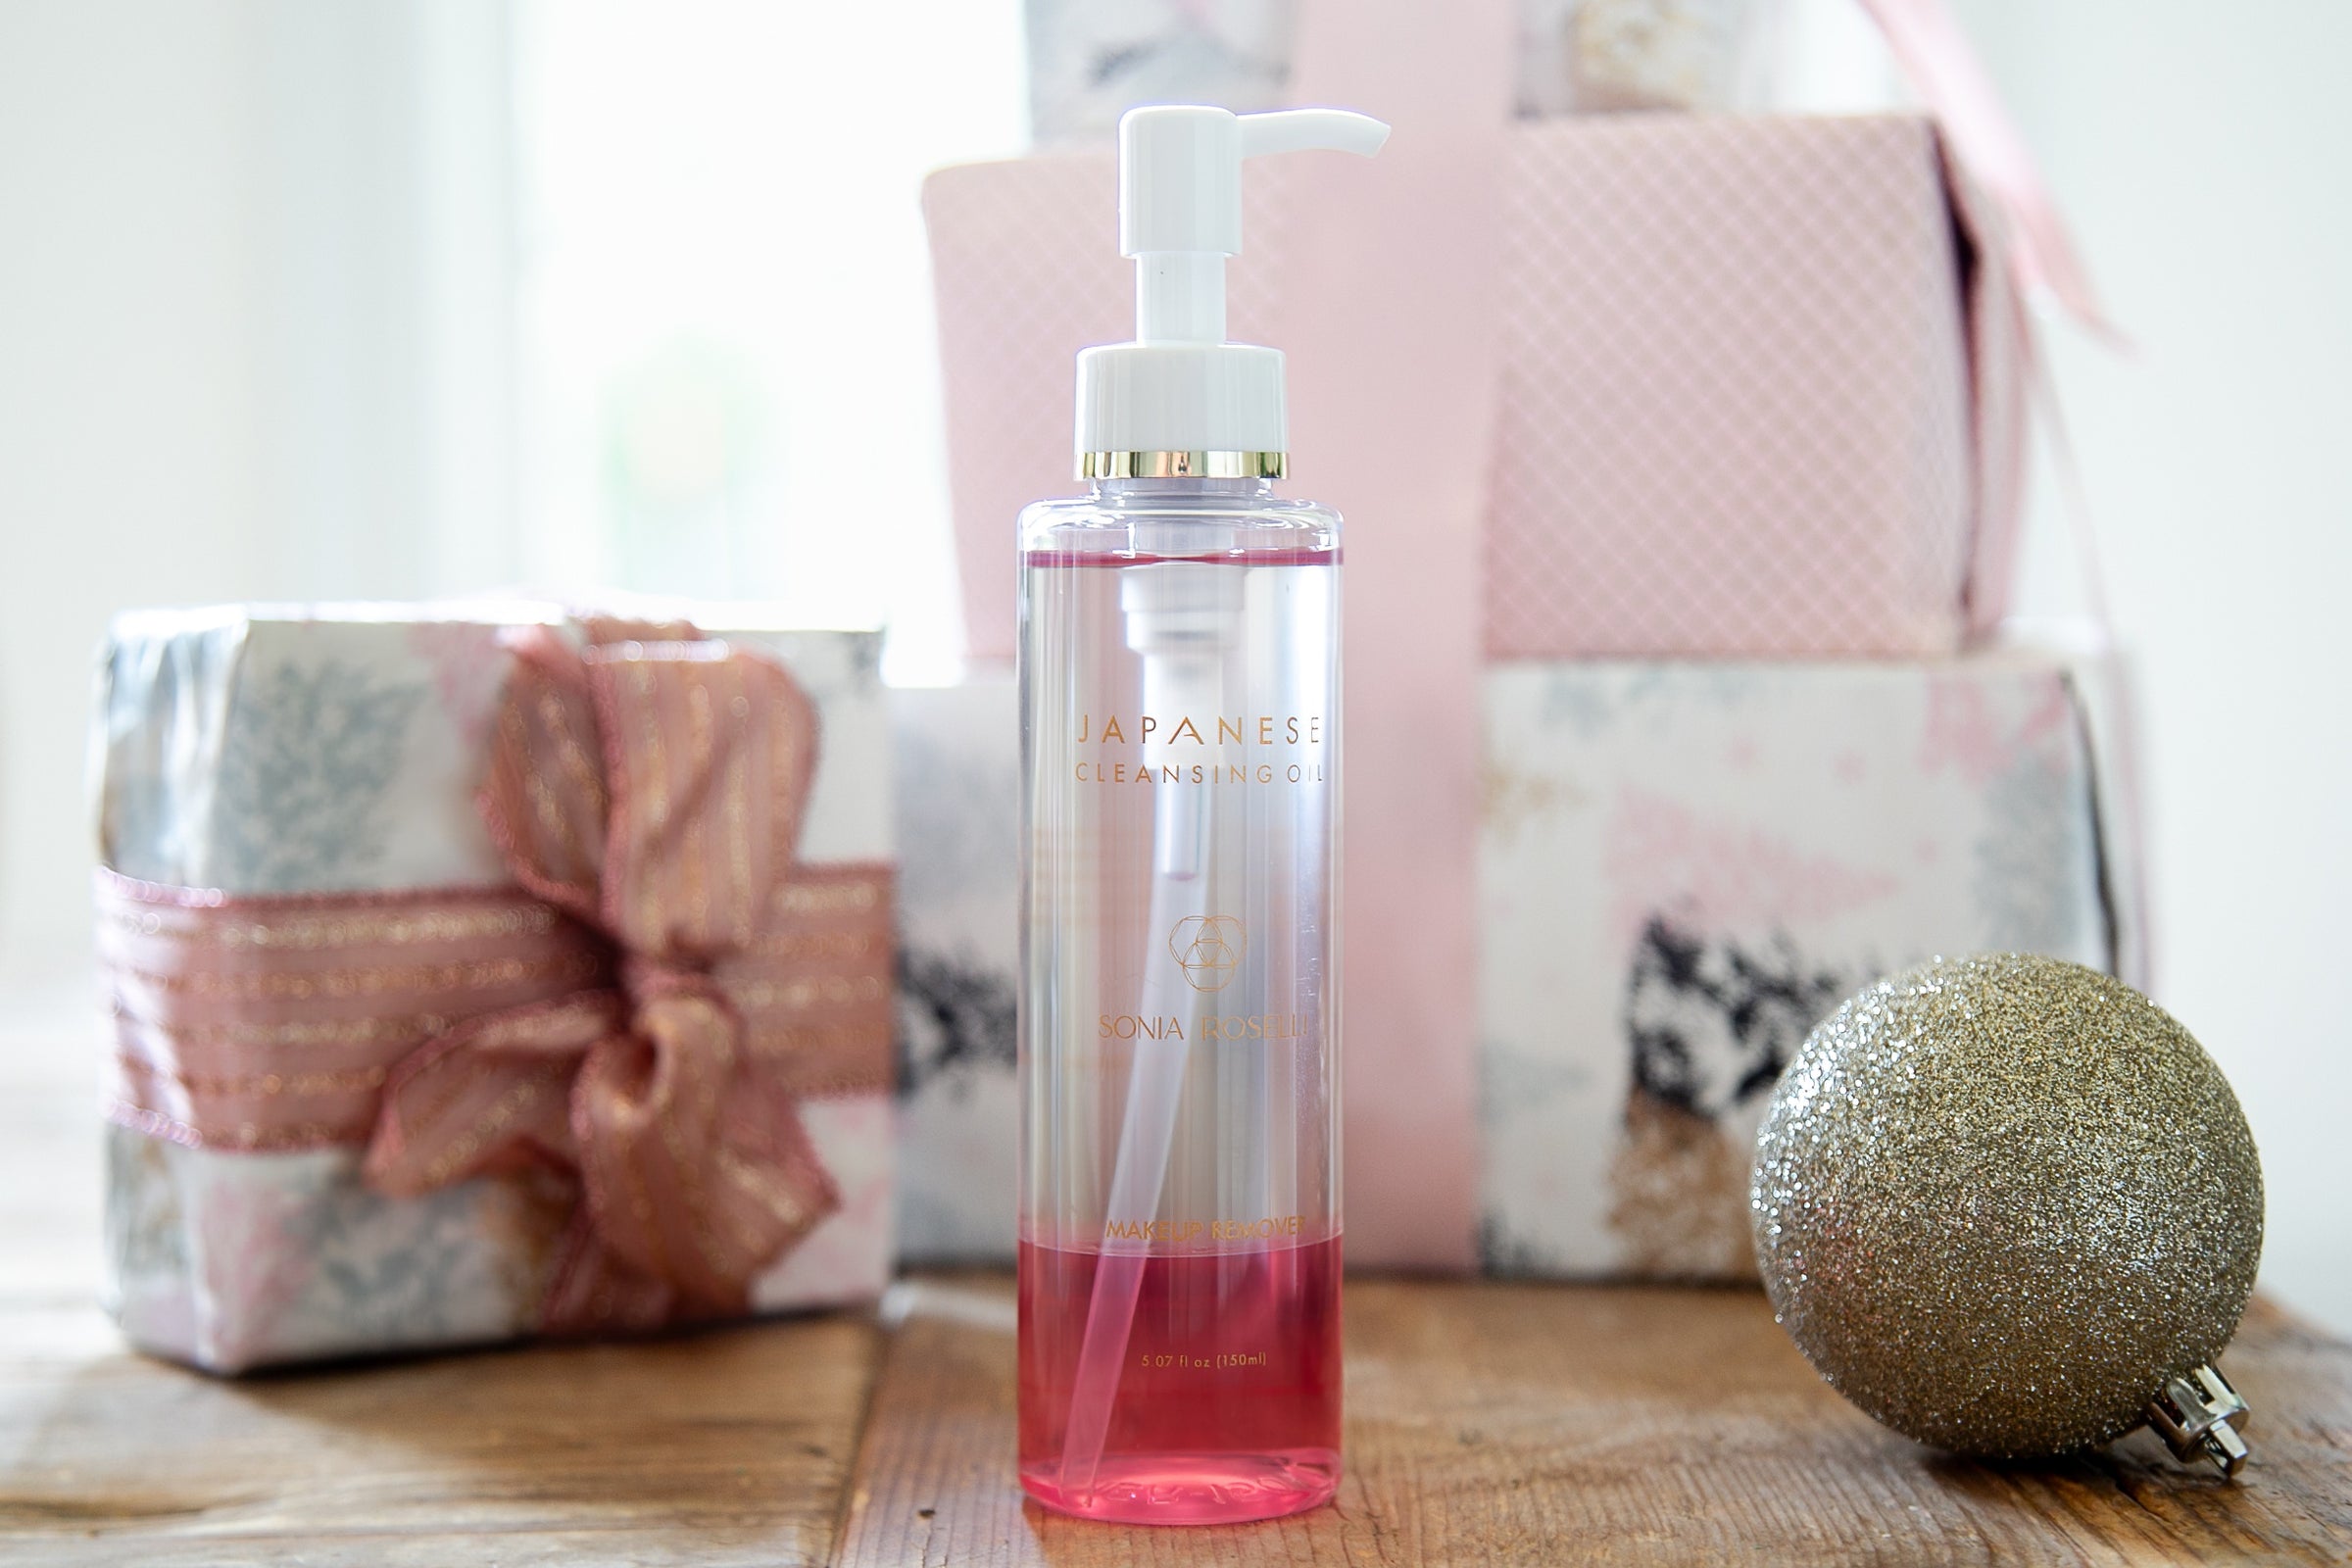 Japanese Cleansing Oil with Holiday gift background